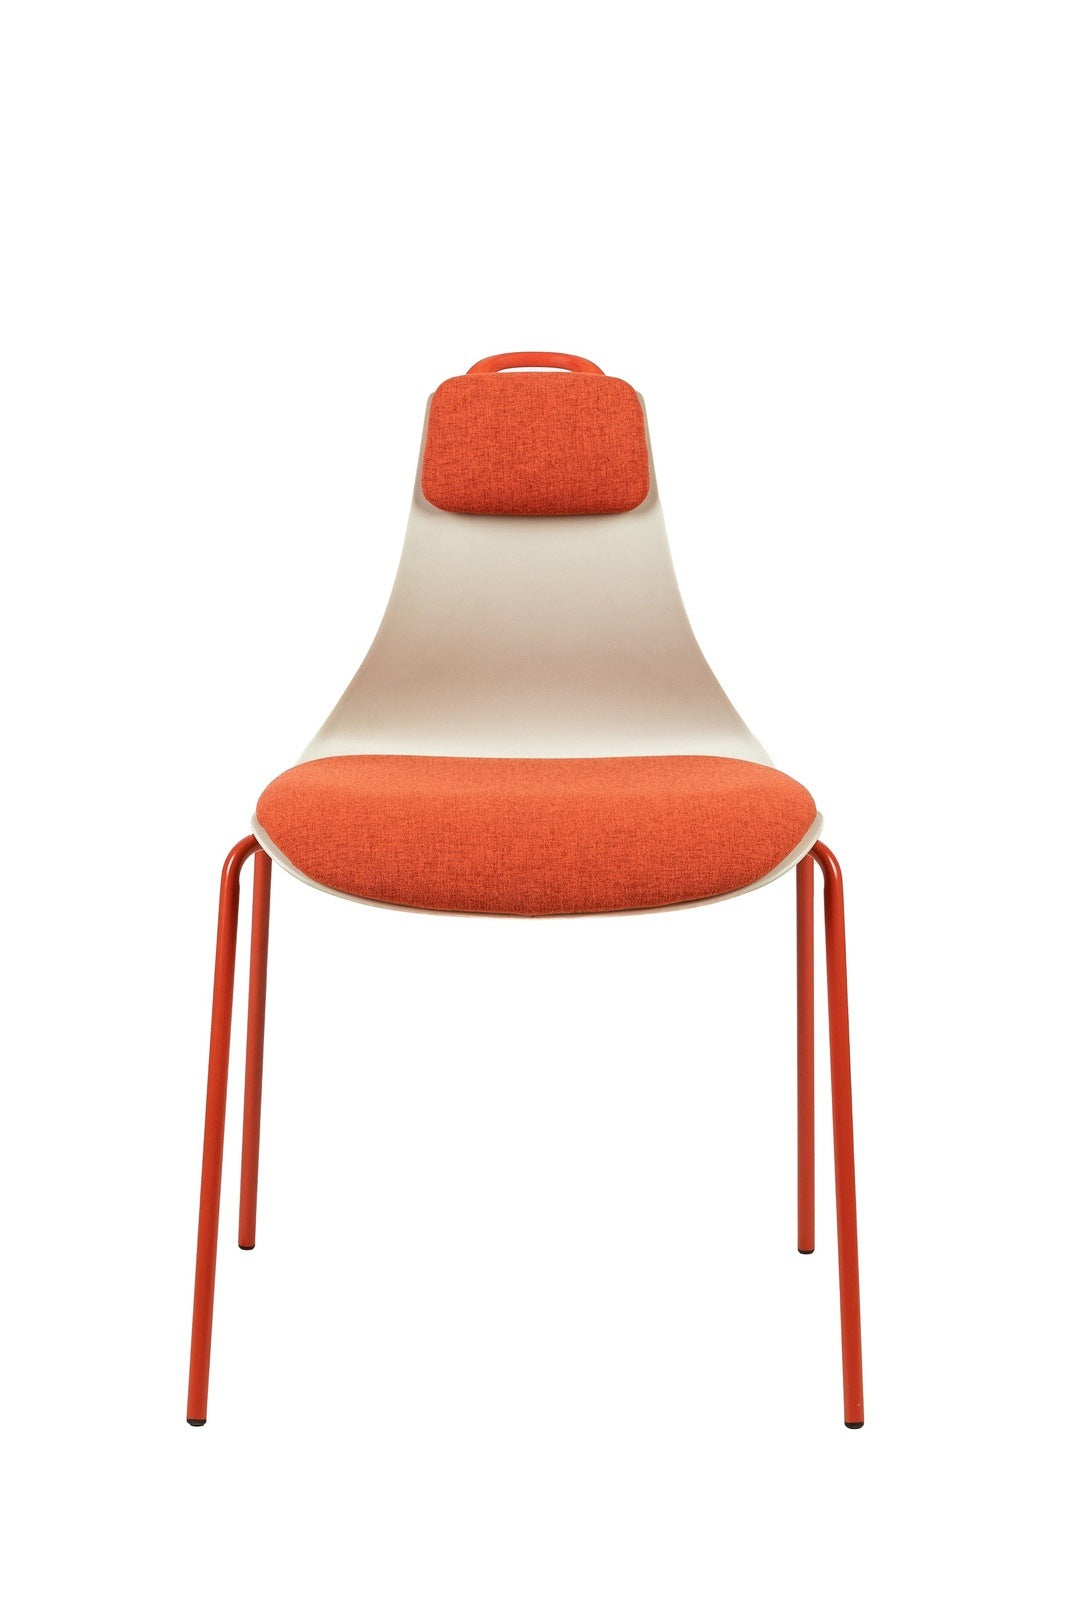 Modern Dining Chair with Padded Seat & Iron Legs - Orange Set of 2